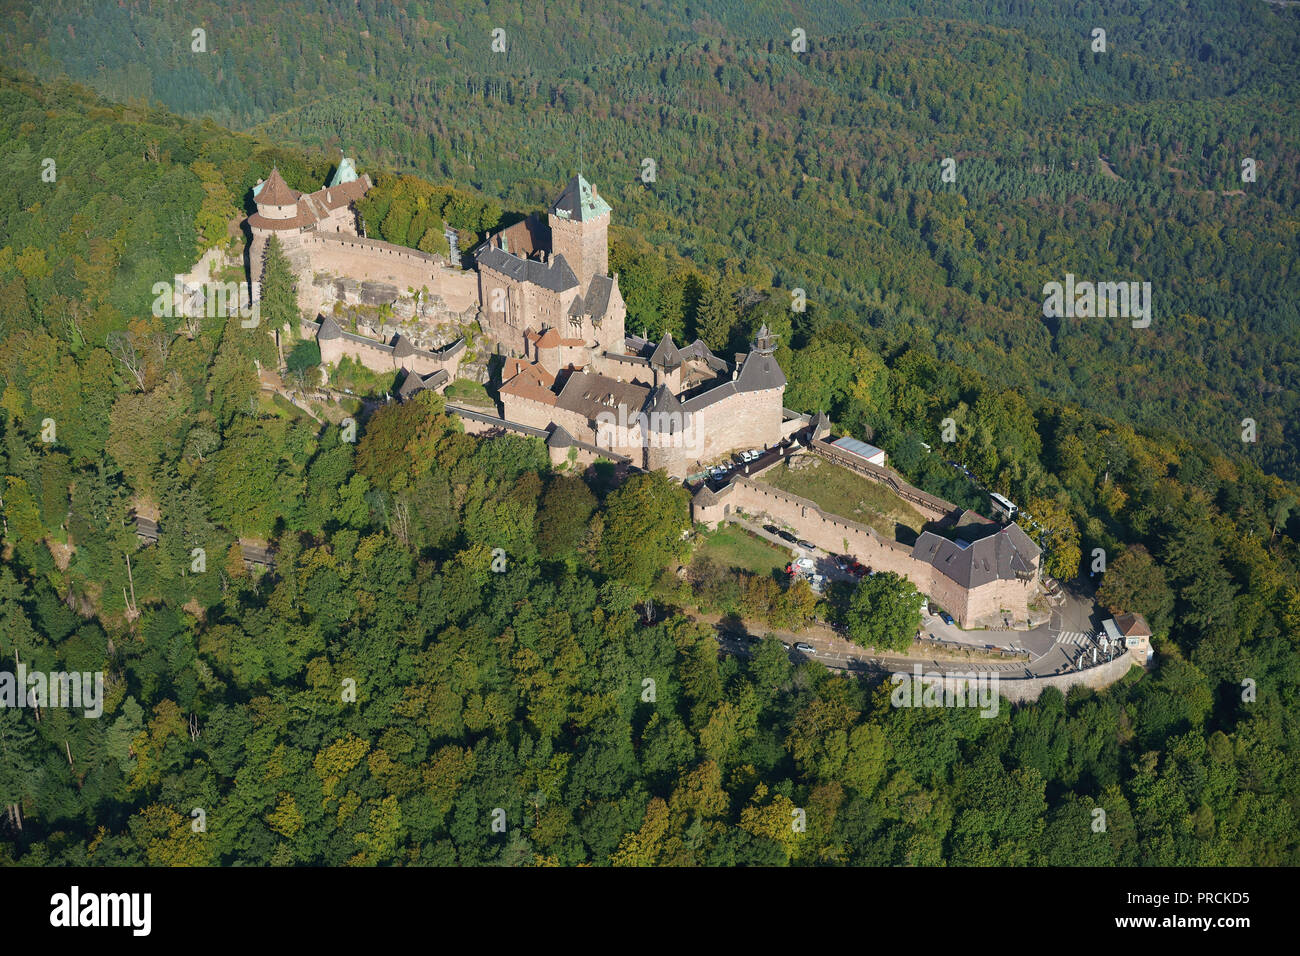 AERIAL VIEW. Pink sandstone medieval castle on a wooded mountain top. Haut-Koenigsbourg Castle, Orschwiller, Bas-Rhin, Alsace, Grand Est, France. Stock Photo